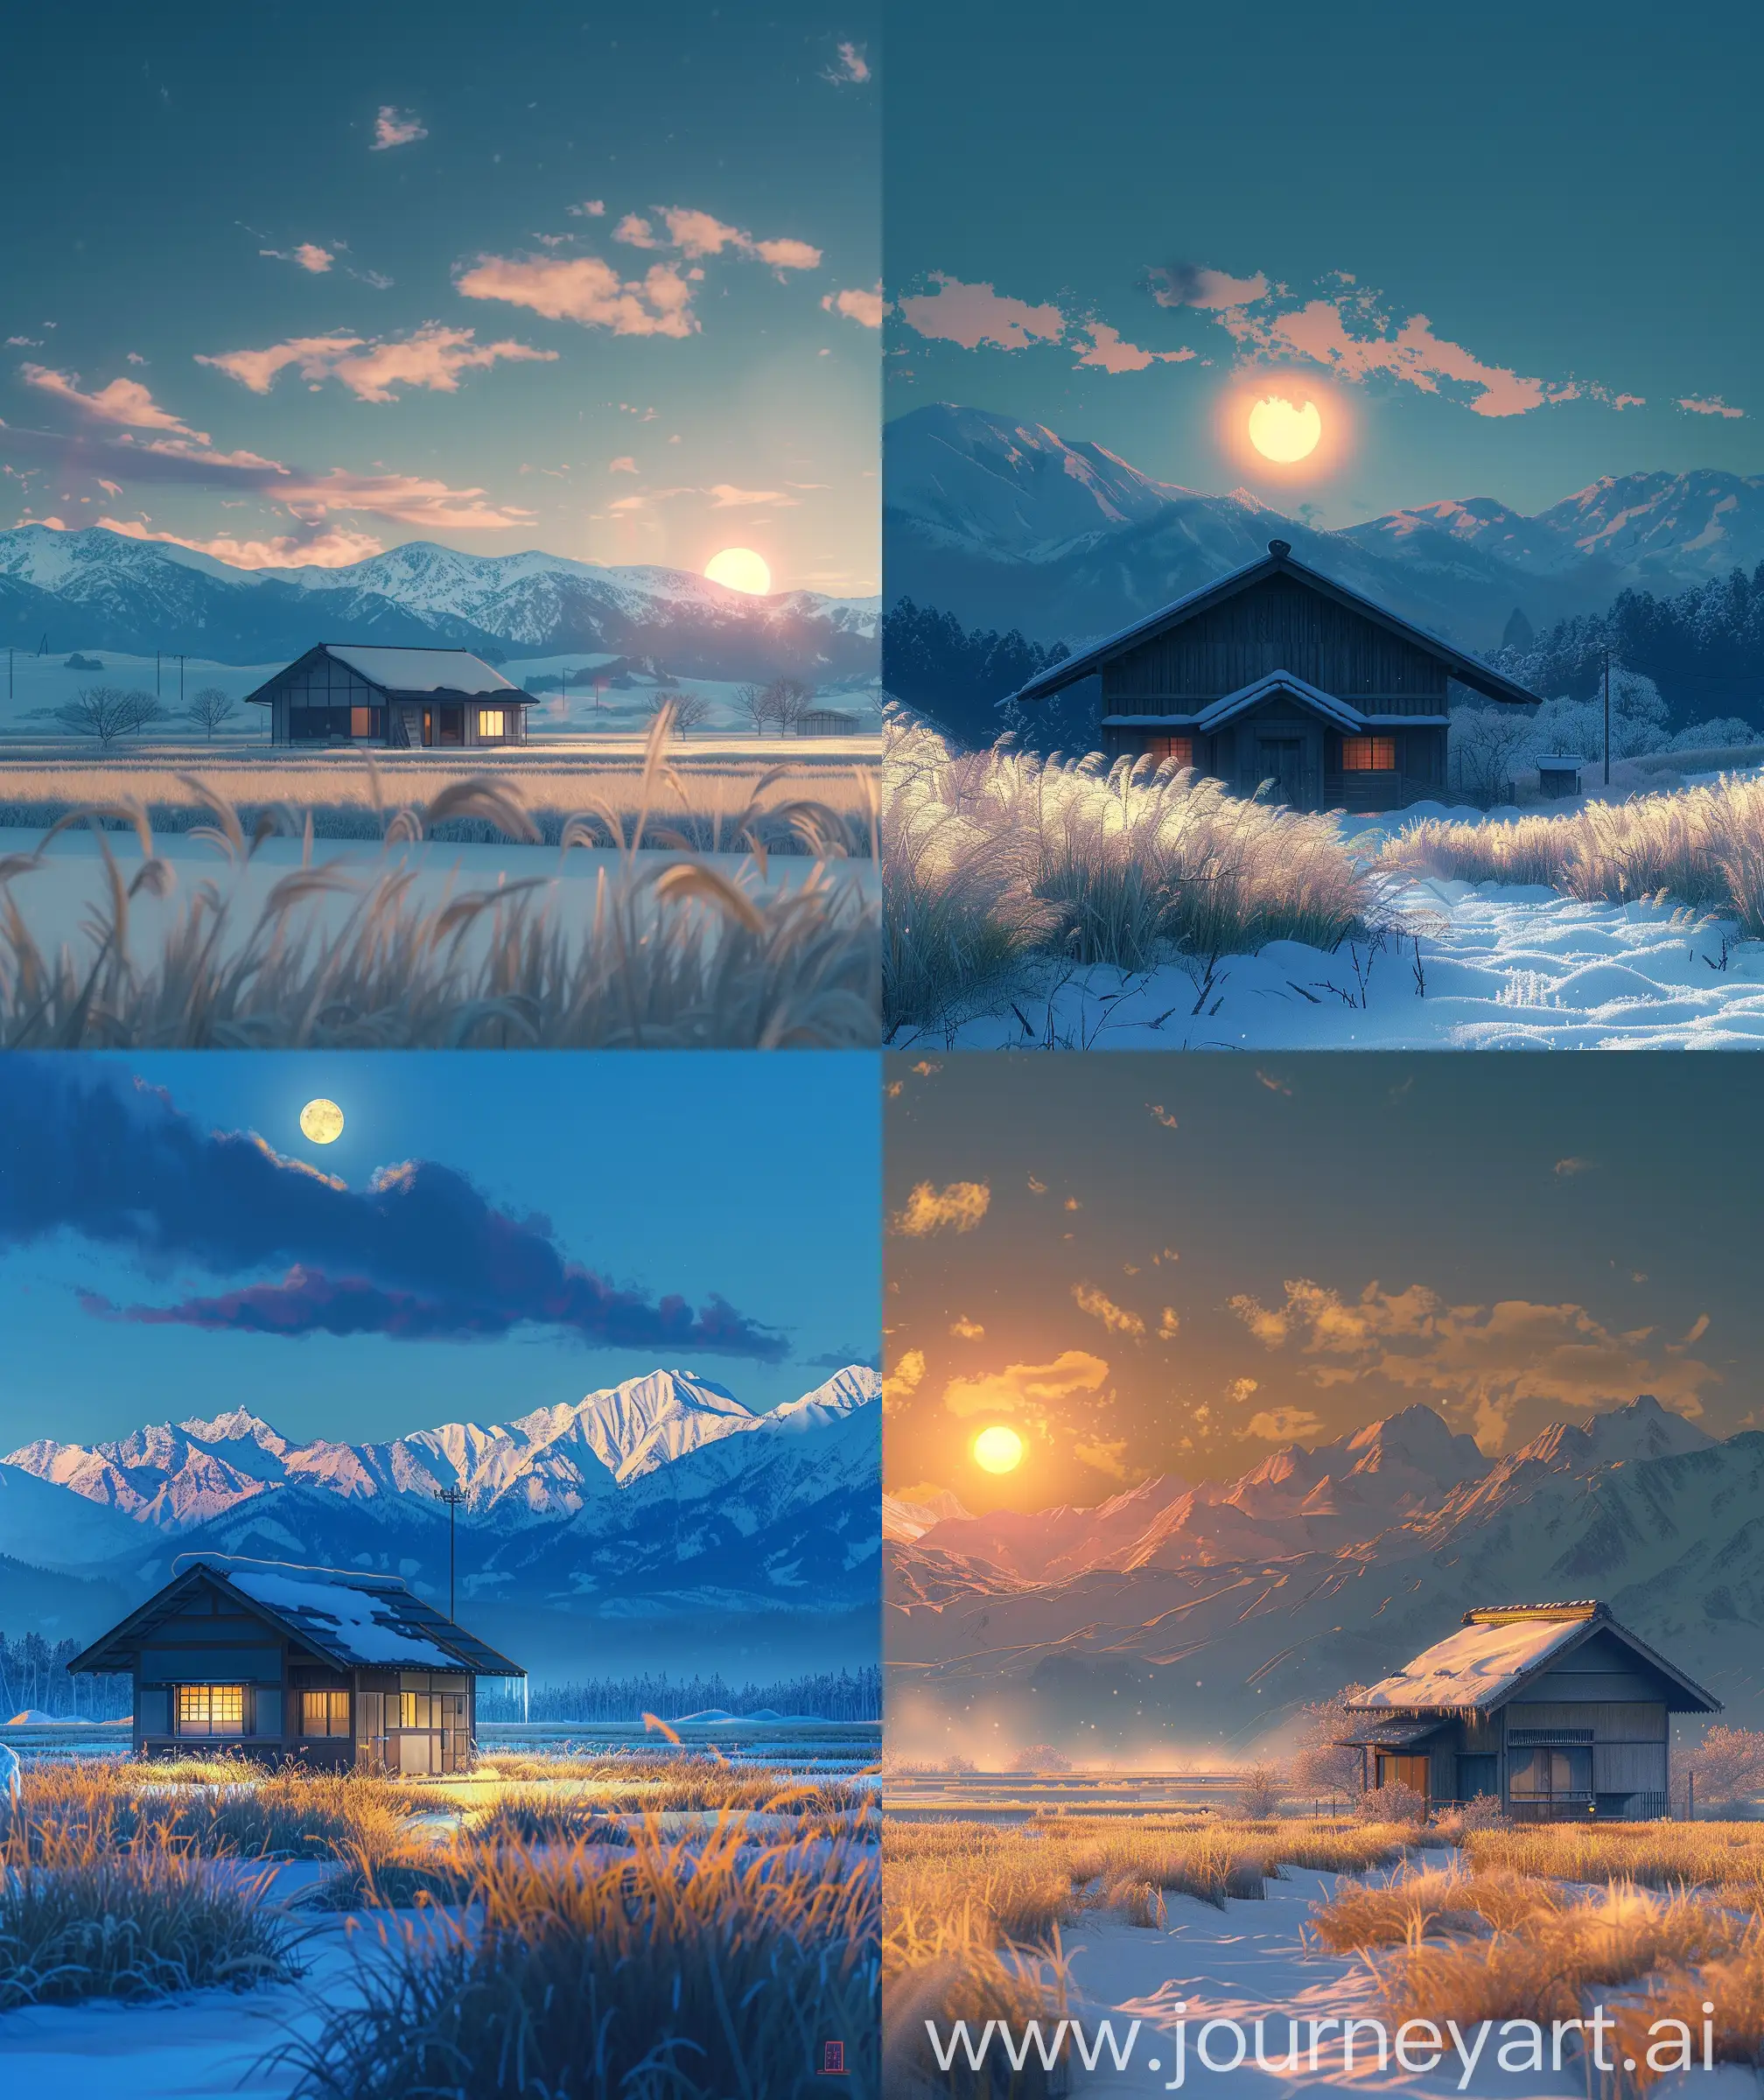 Evening-Anime-Scenery-Serene-Small-House-with-Snowy-Mountain-Backdrop